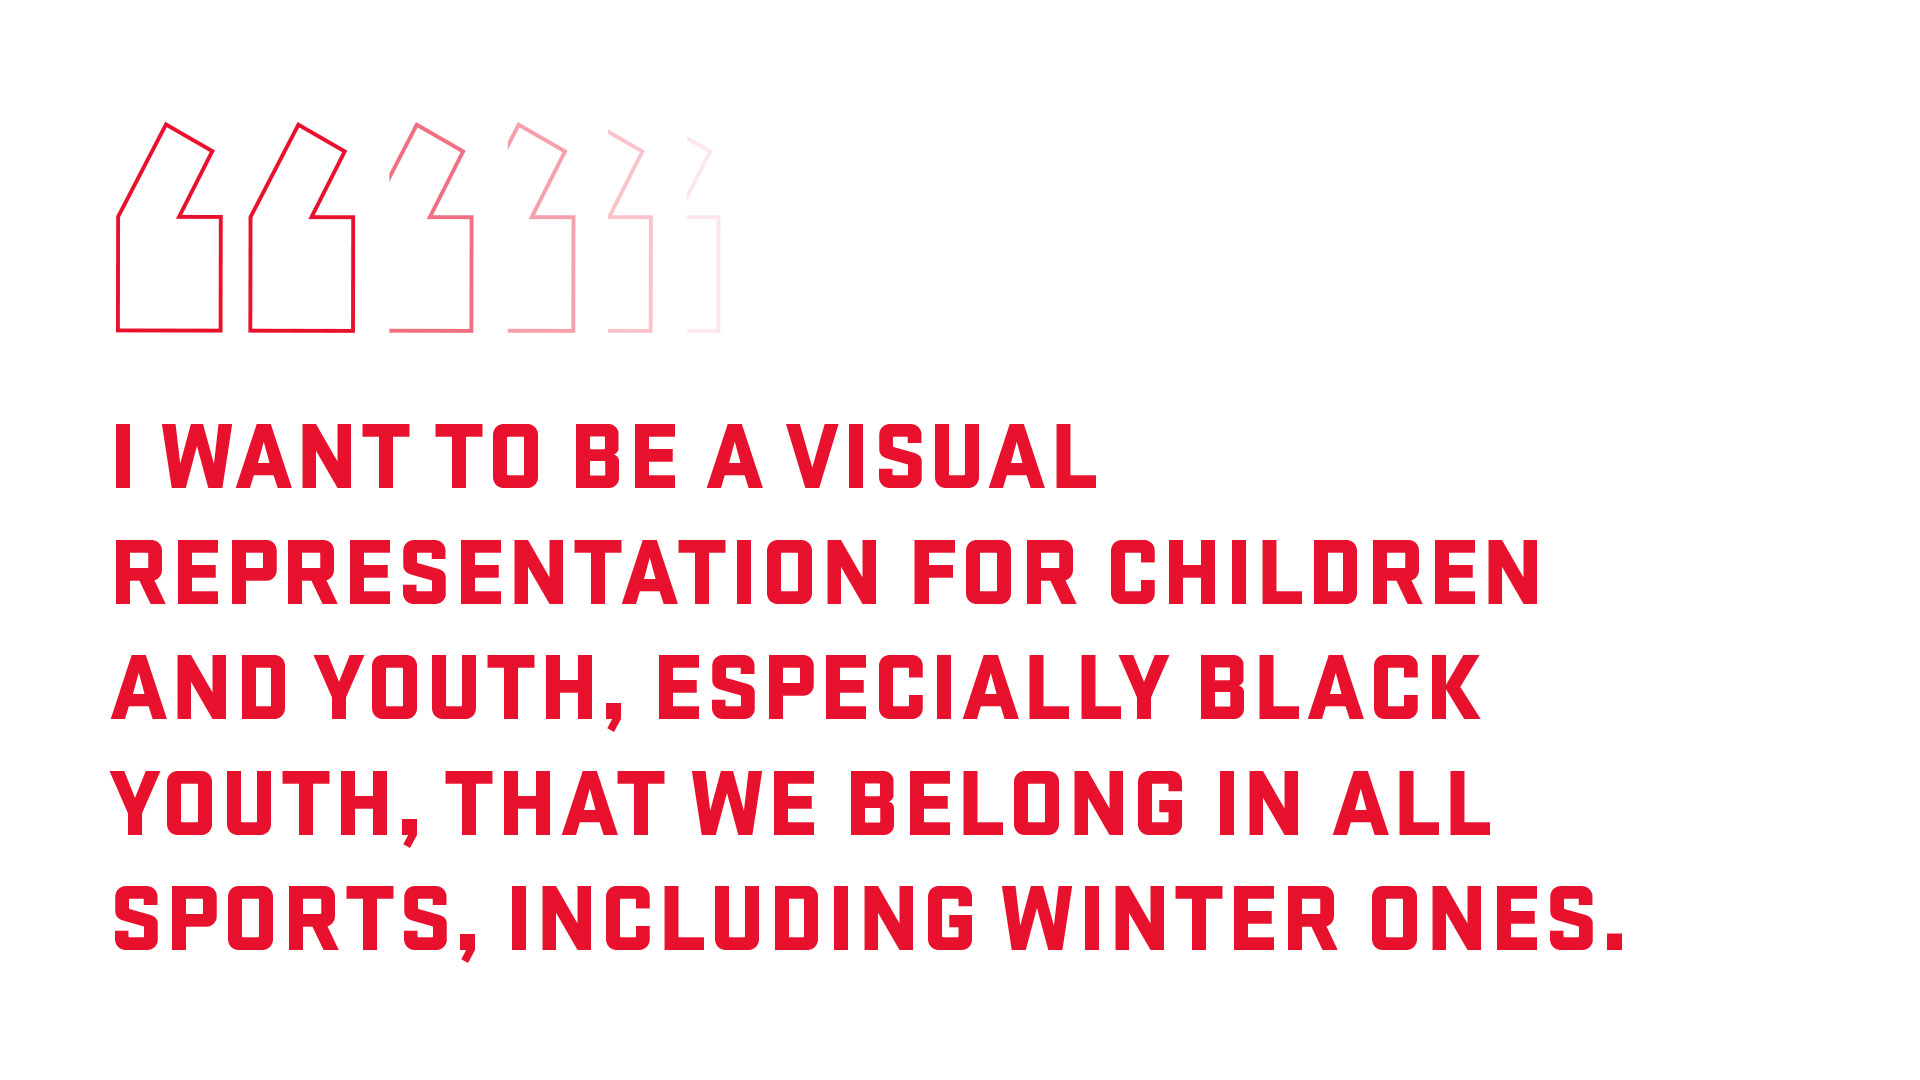 Block quote: I want to be a visual representation for children and youth, especially Black youth, that we belong in all sports, including winter ones. 